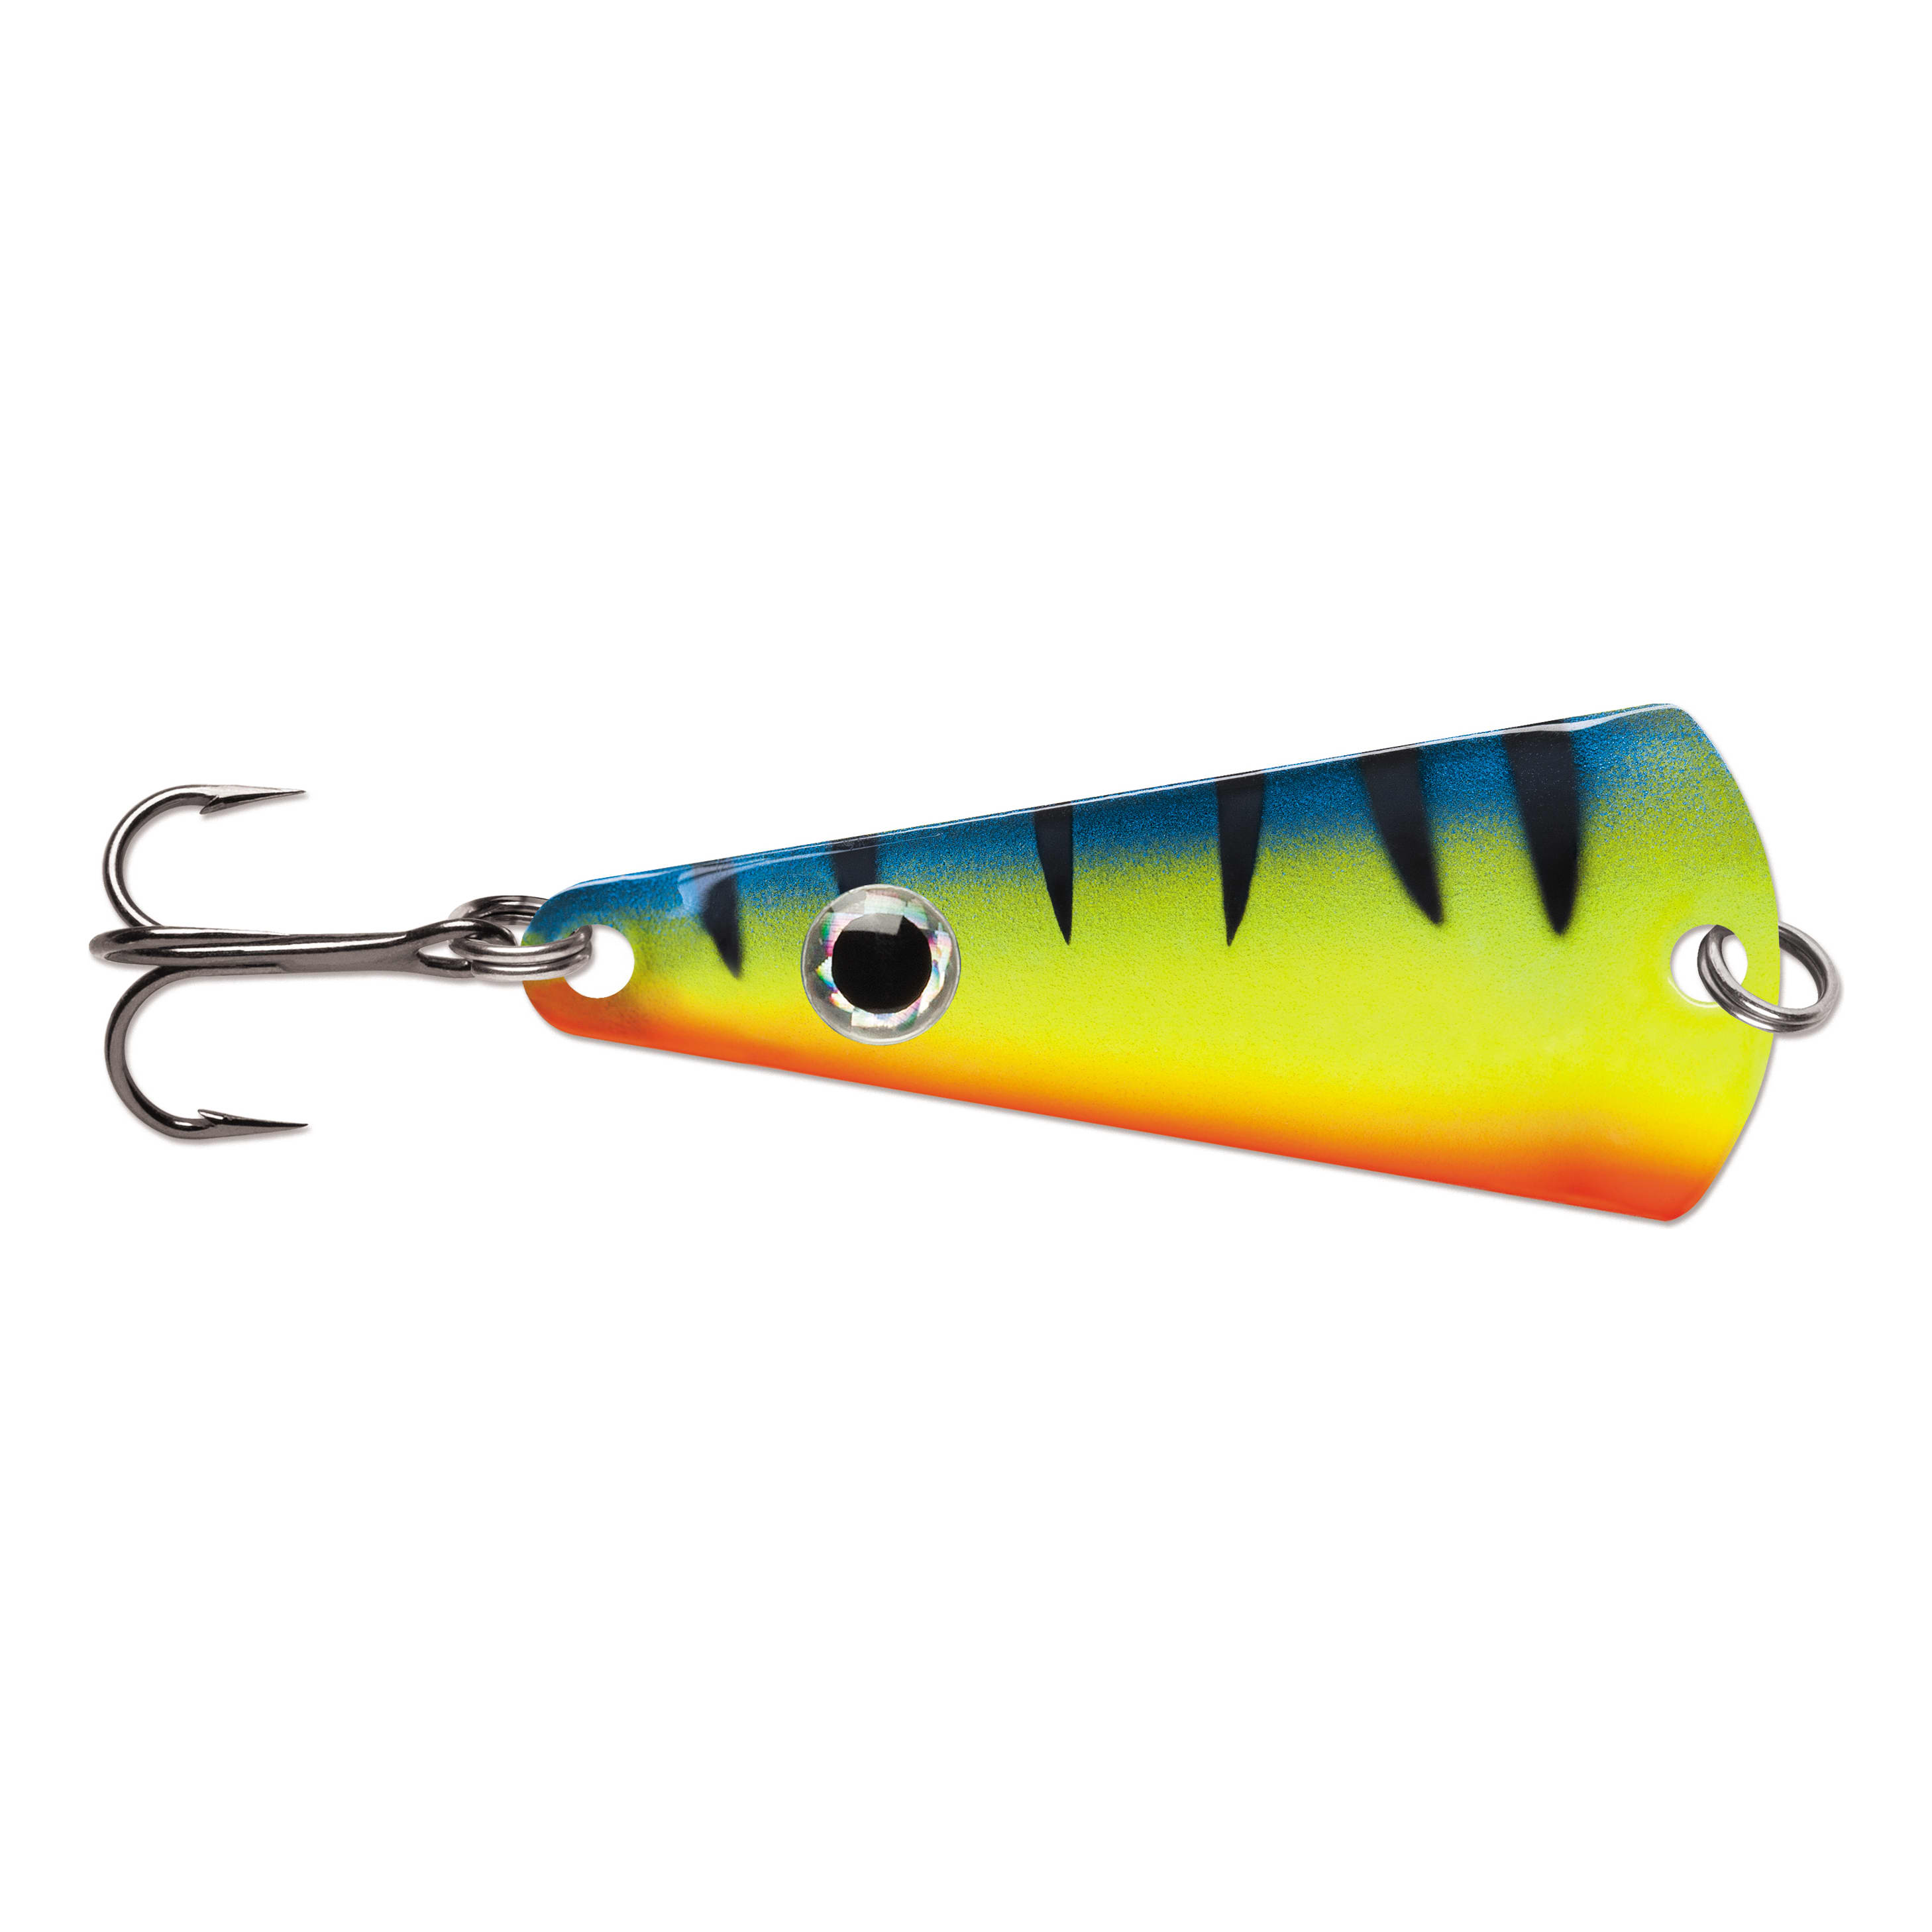  Catchmore Big Brother Walleye Spoon, 3-1/4 - 2 Spoons Same  Color (Antifreeze/Green Tiger/Silver Back) : Sports & Outdoors